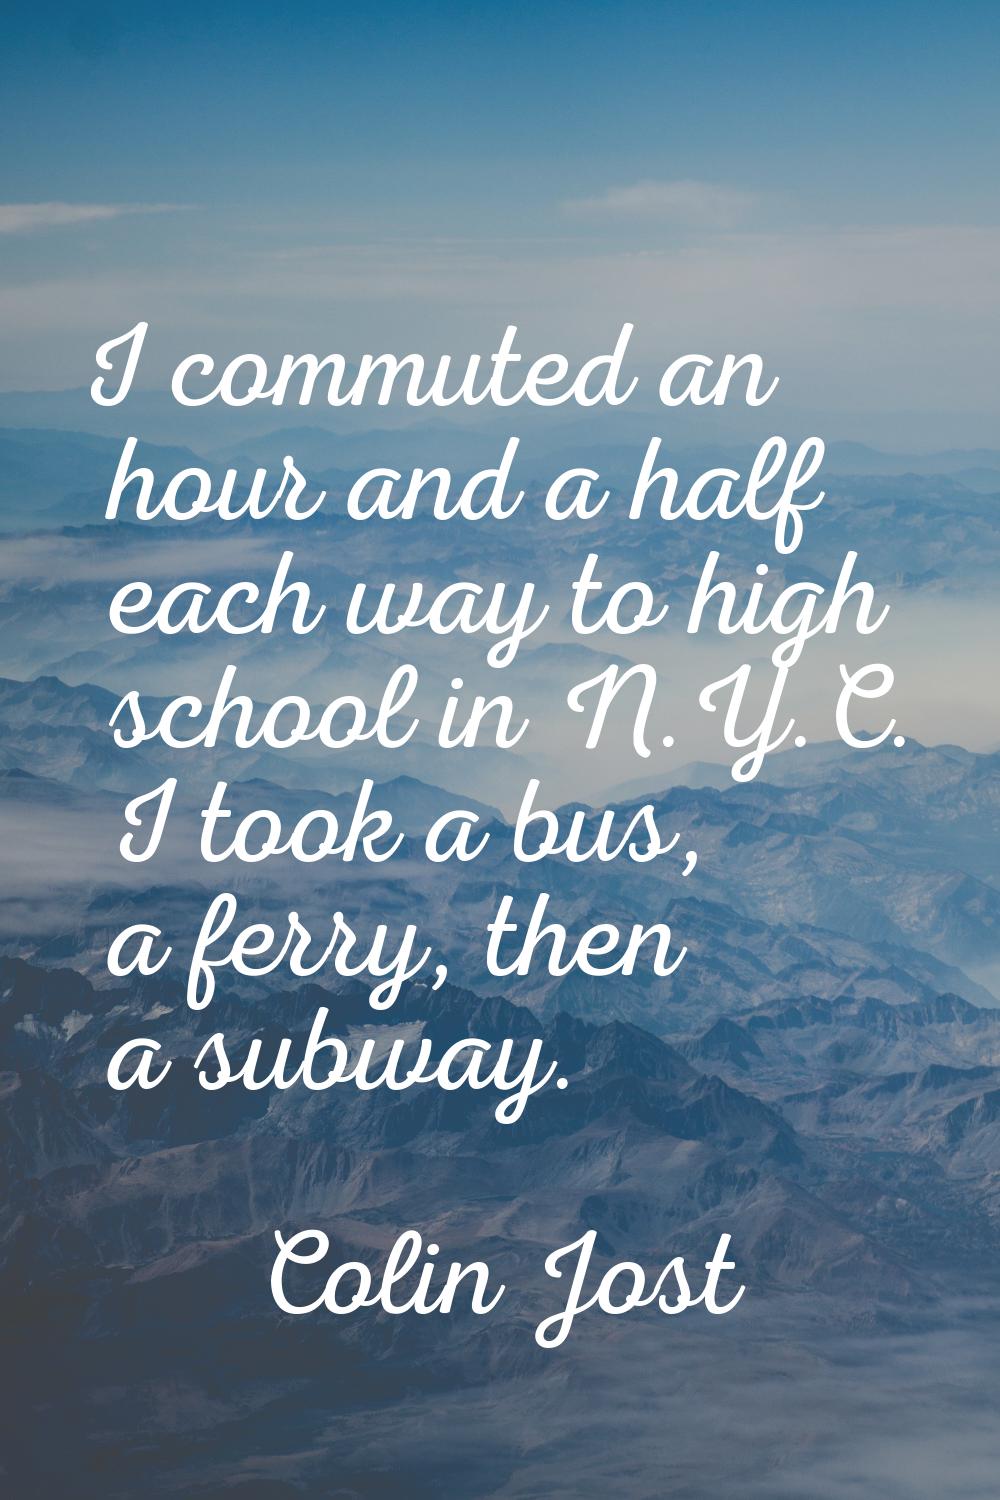 I commuted an hour and a half each way to high school in N.Y.C. I took a bus, a ferry, then a subwa